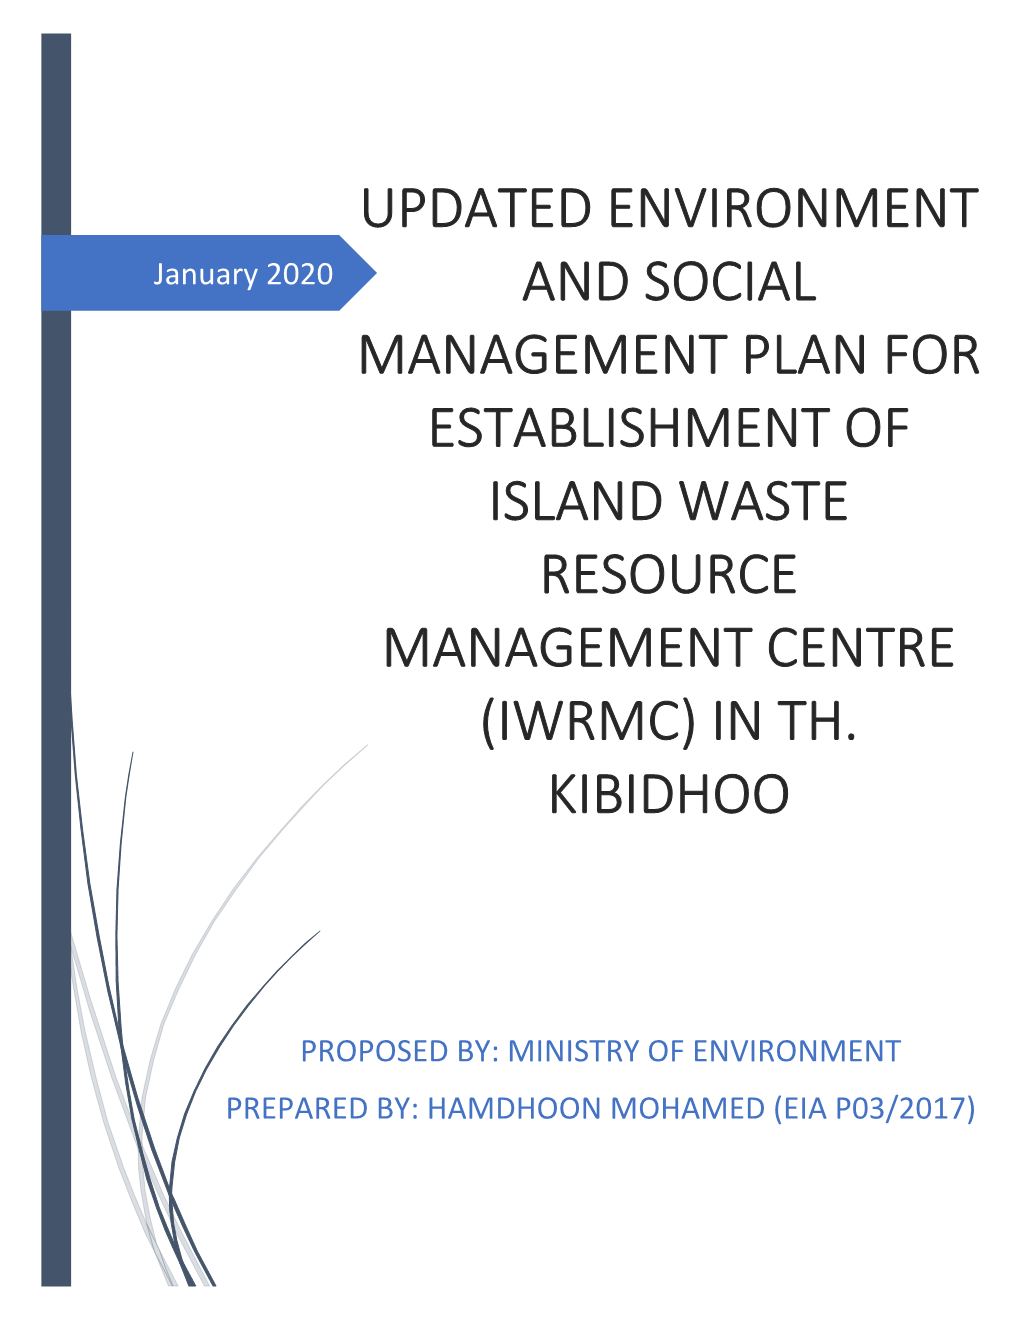 Updated Environment and Social Management Plan